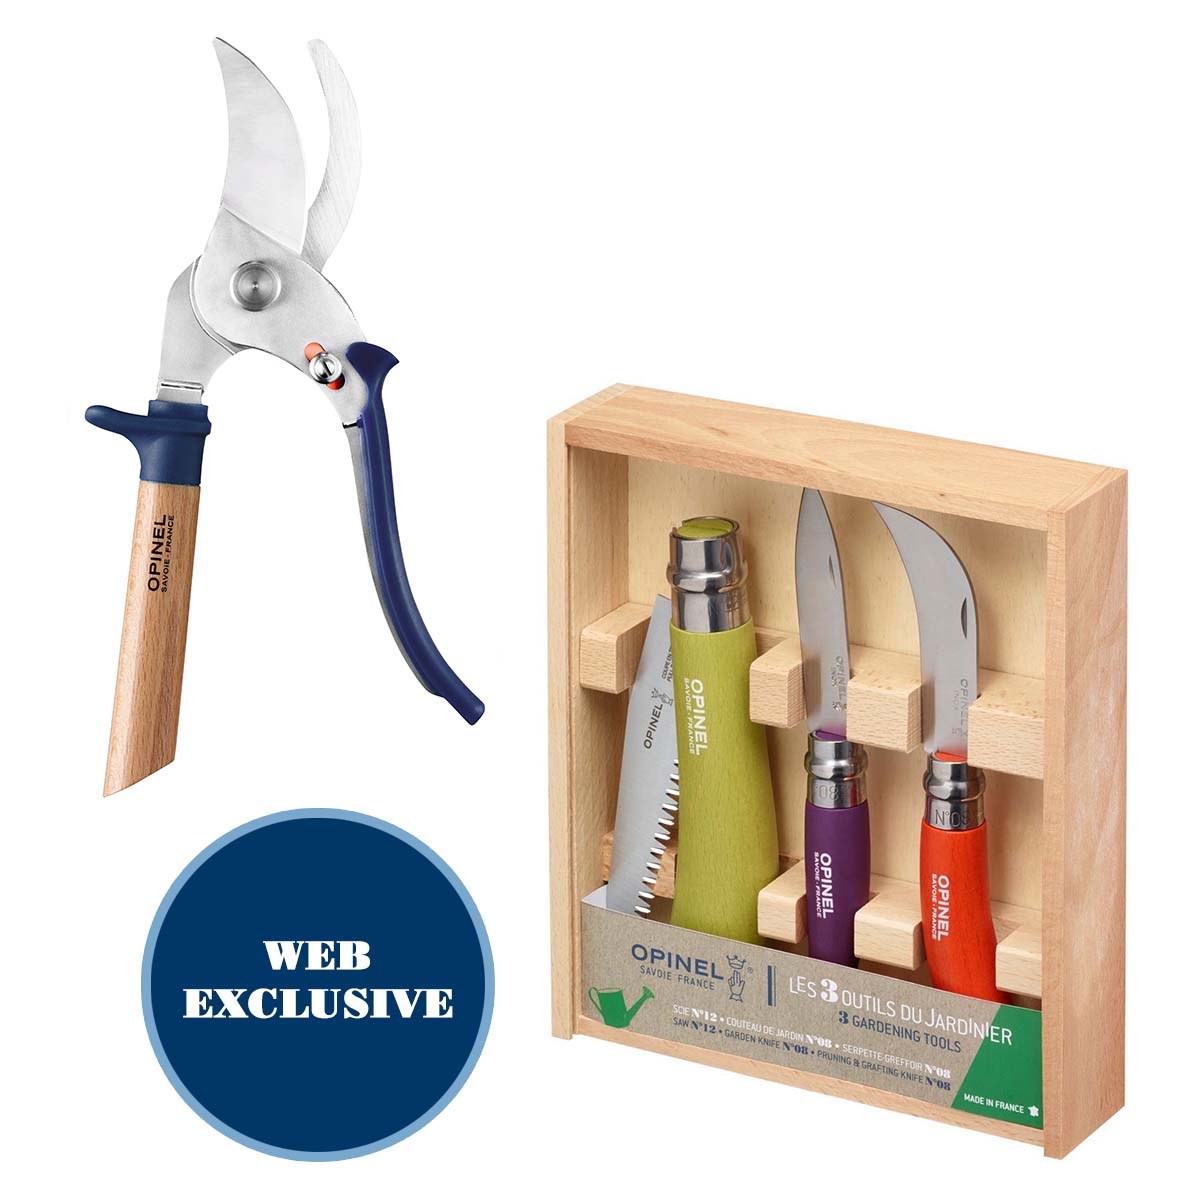 Chef-at-Work Les Forgés 1890 Knives Set - OPINEL USA